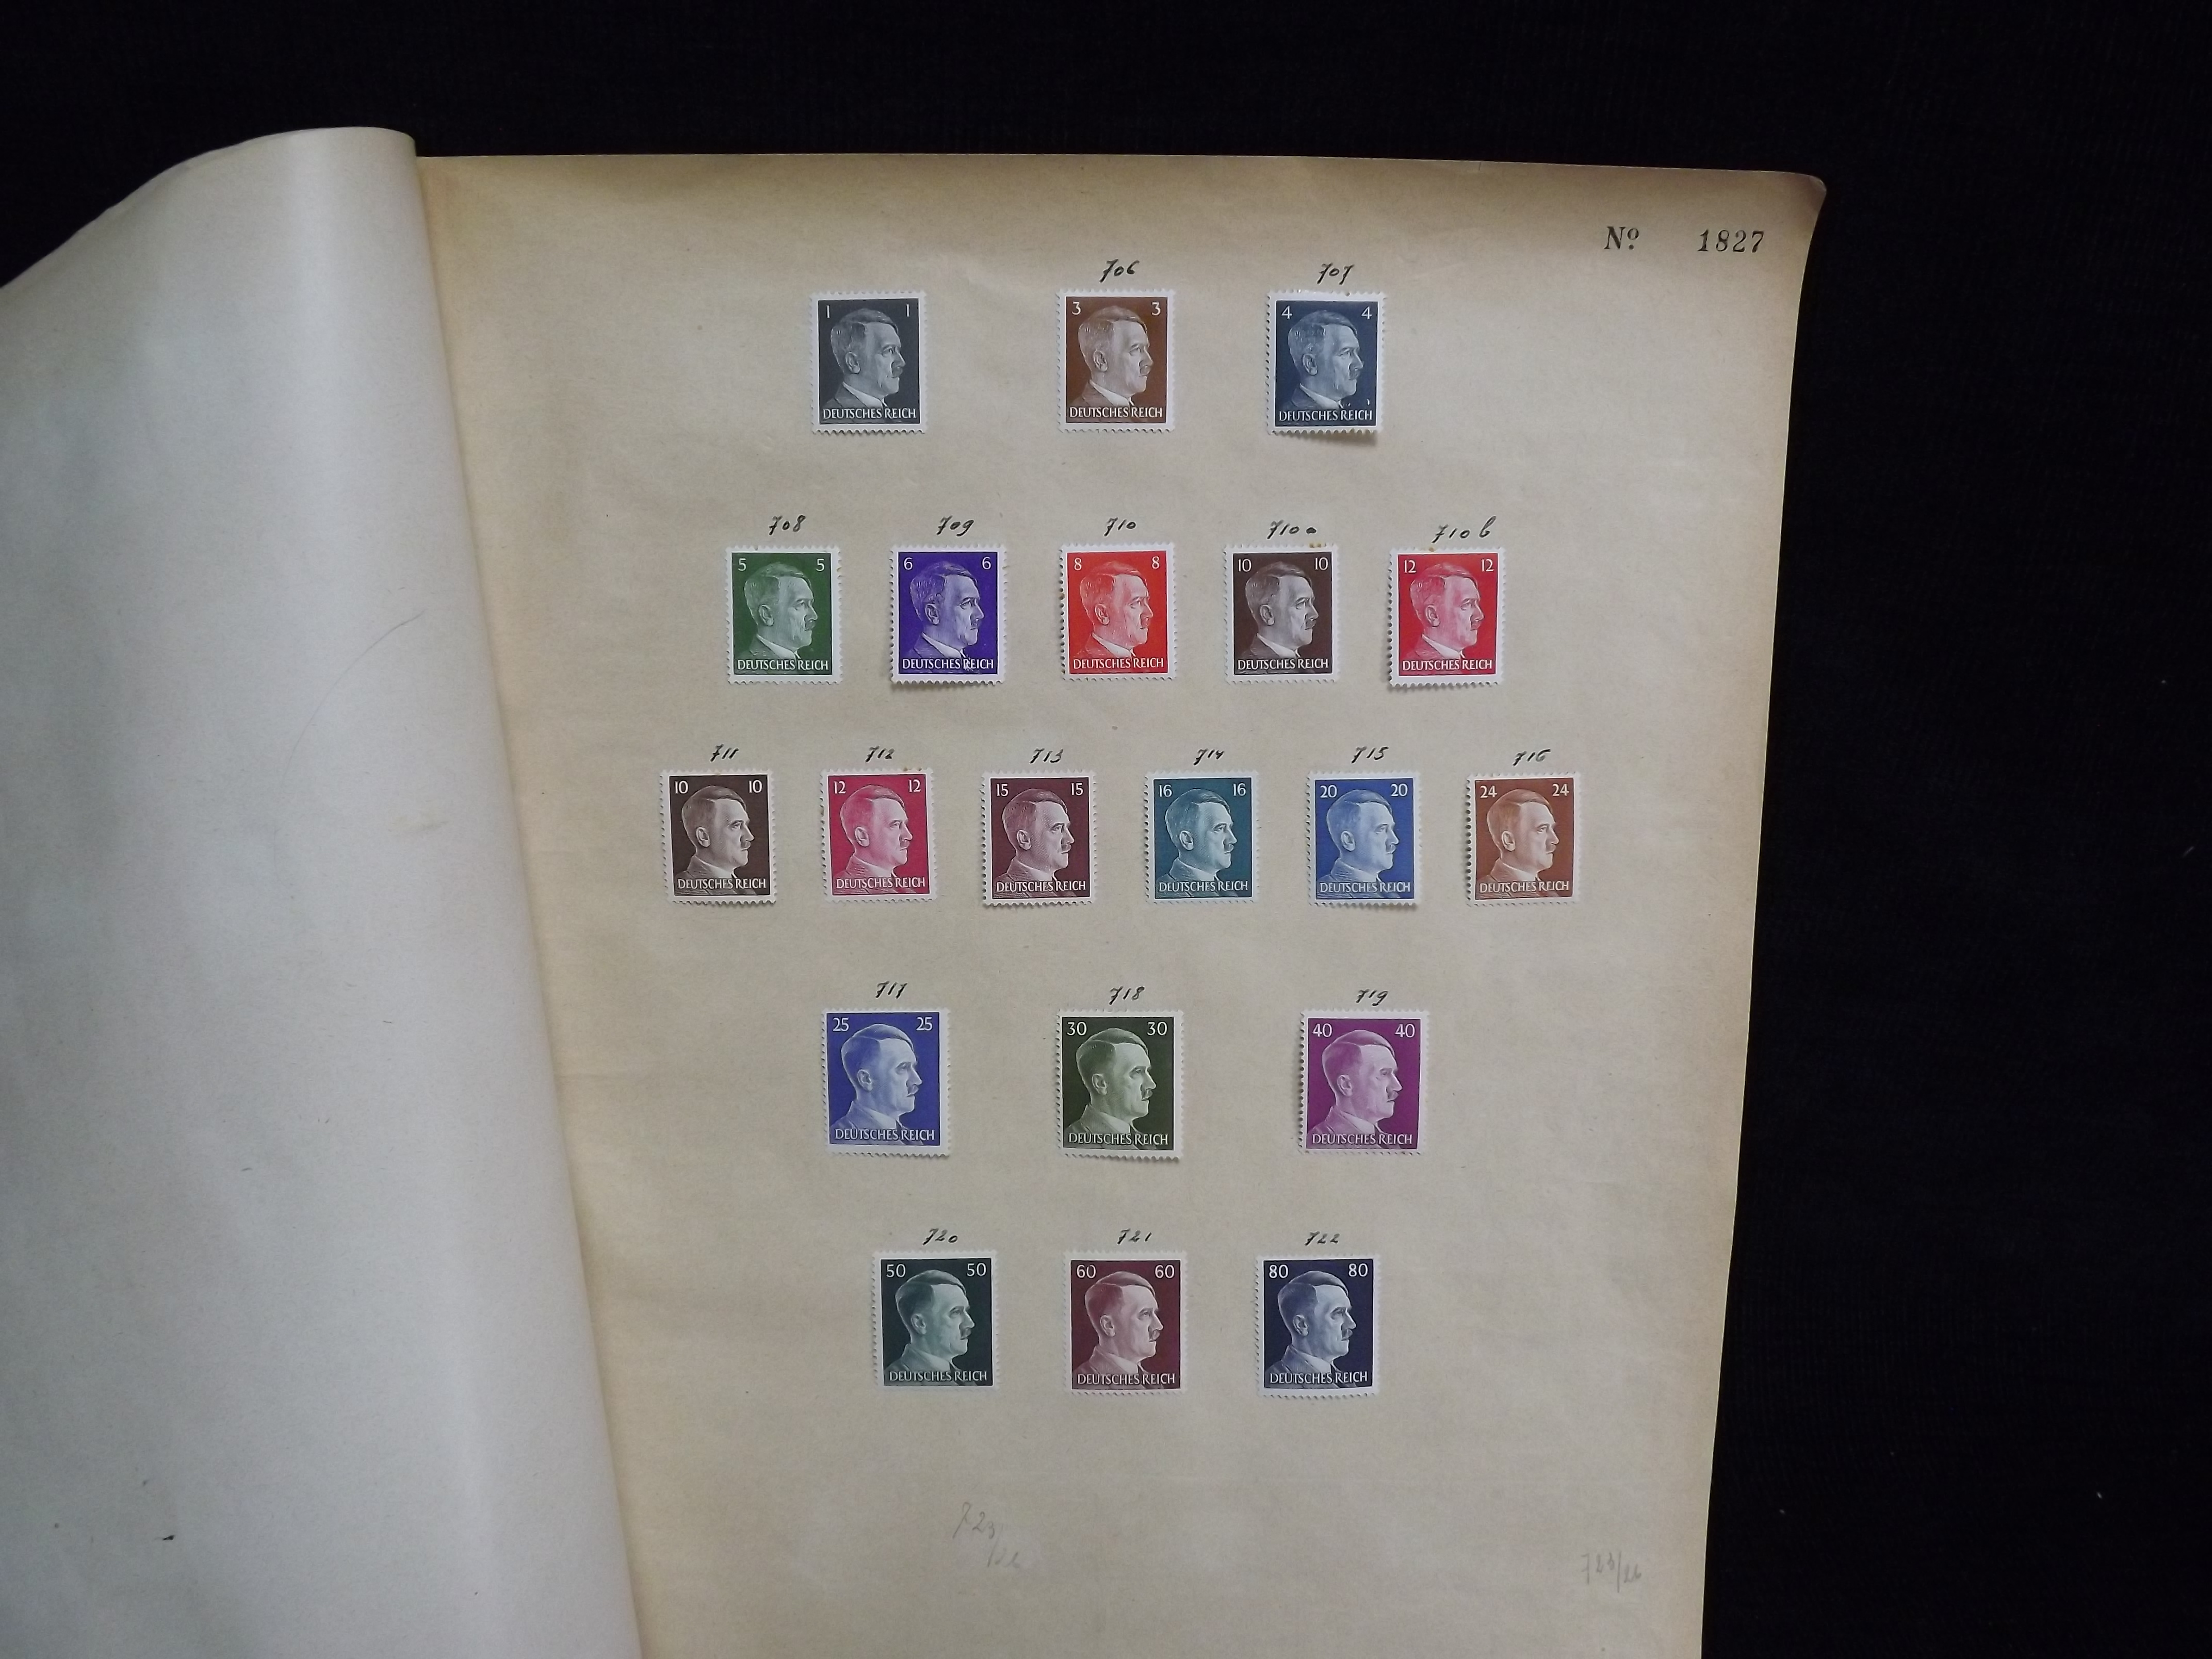 Over 500 x German Used & Mint Postage Stamps. Housed in old ledger page Album. Includes various - Image 19 of 30